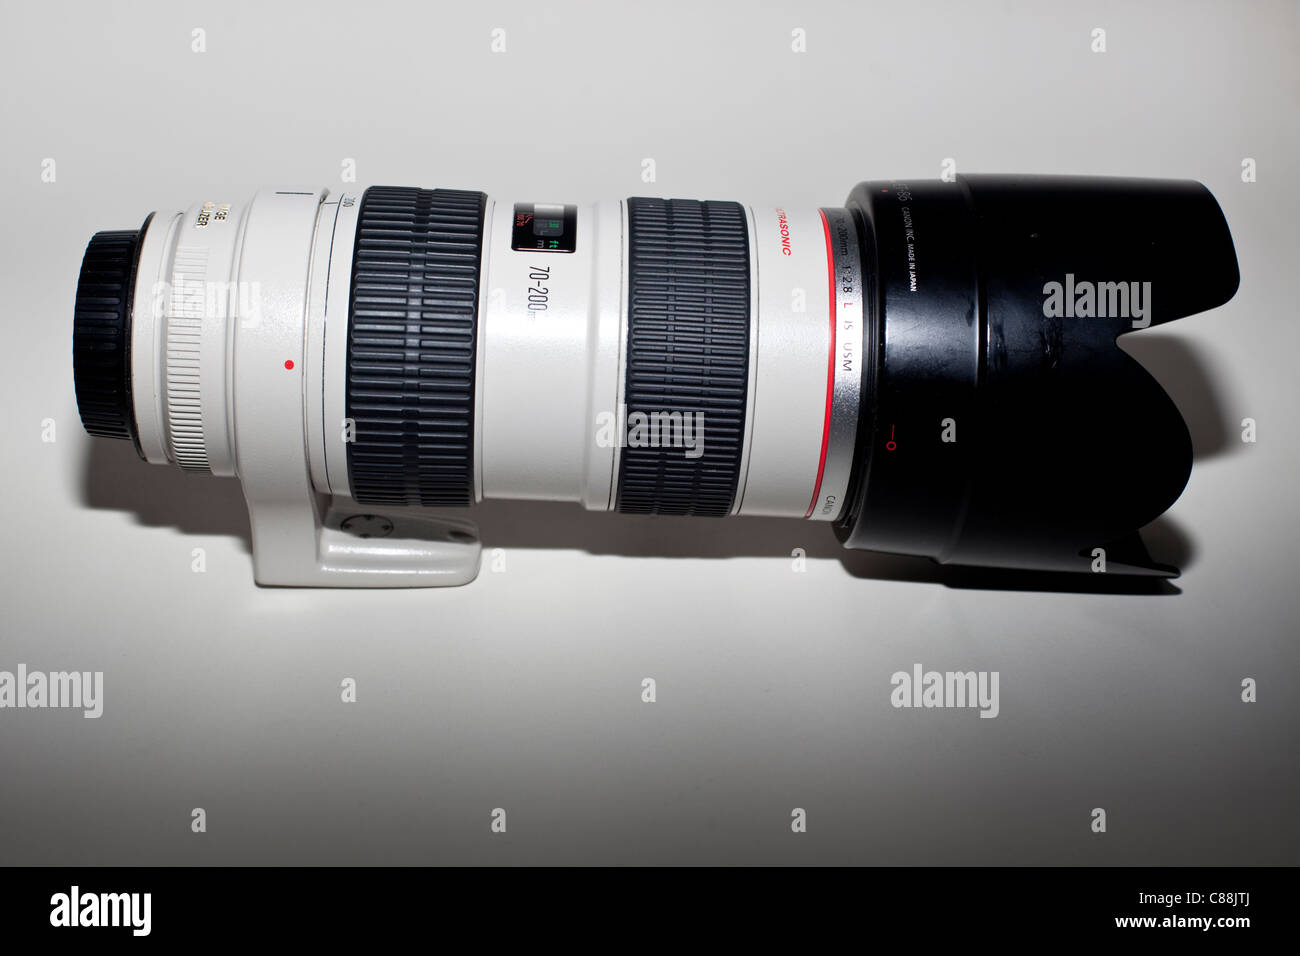 Canon EF 70-200mm f/2.8L IS USM telephoto zoom photography lens Stock Photo  - Alamy